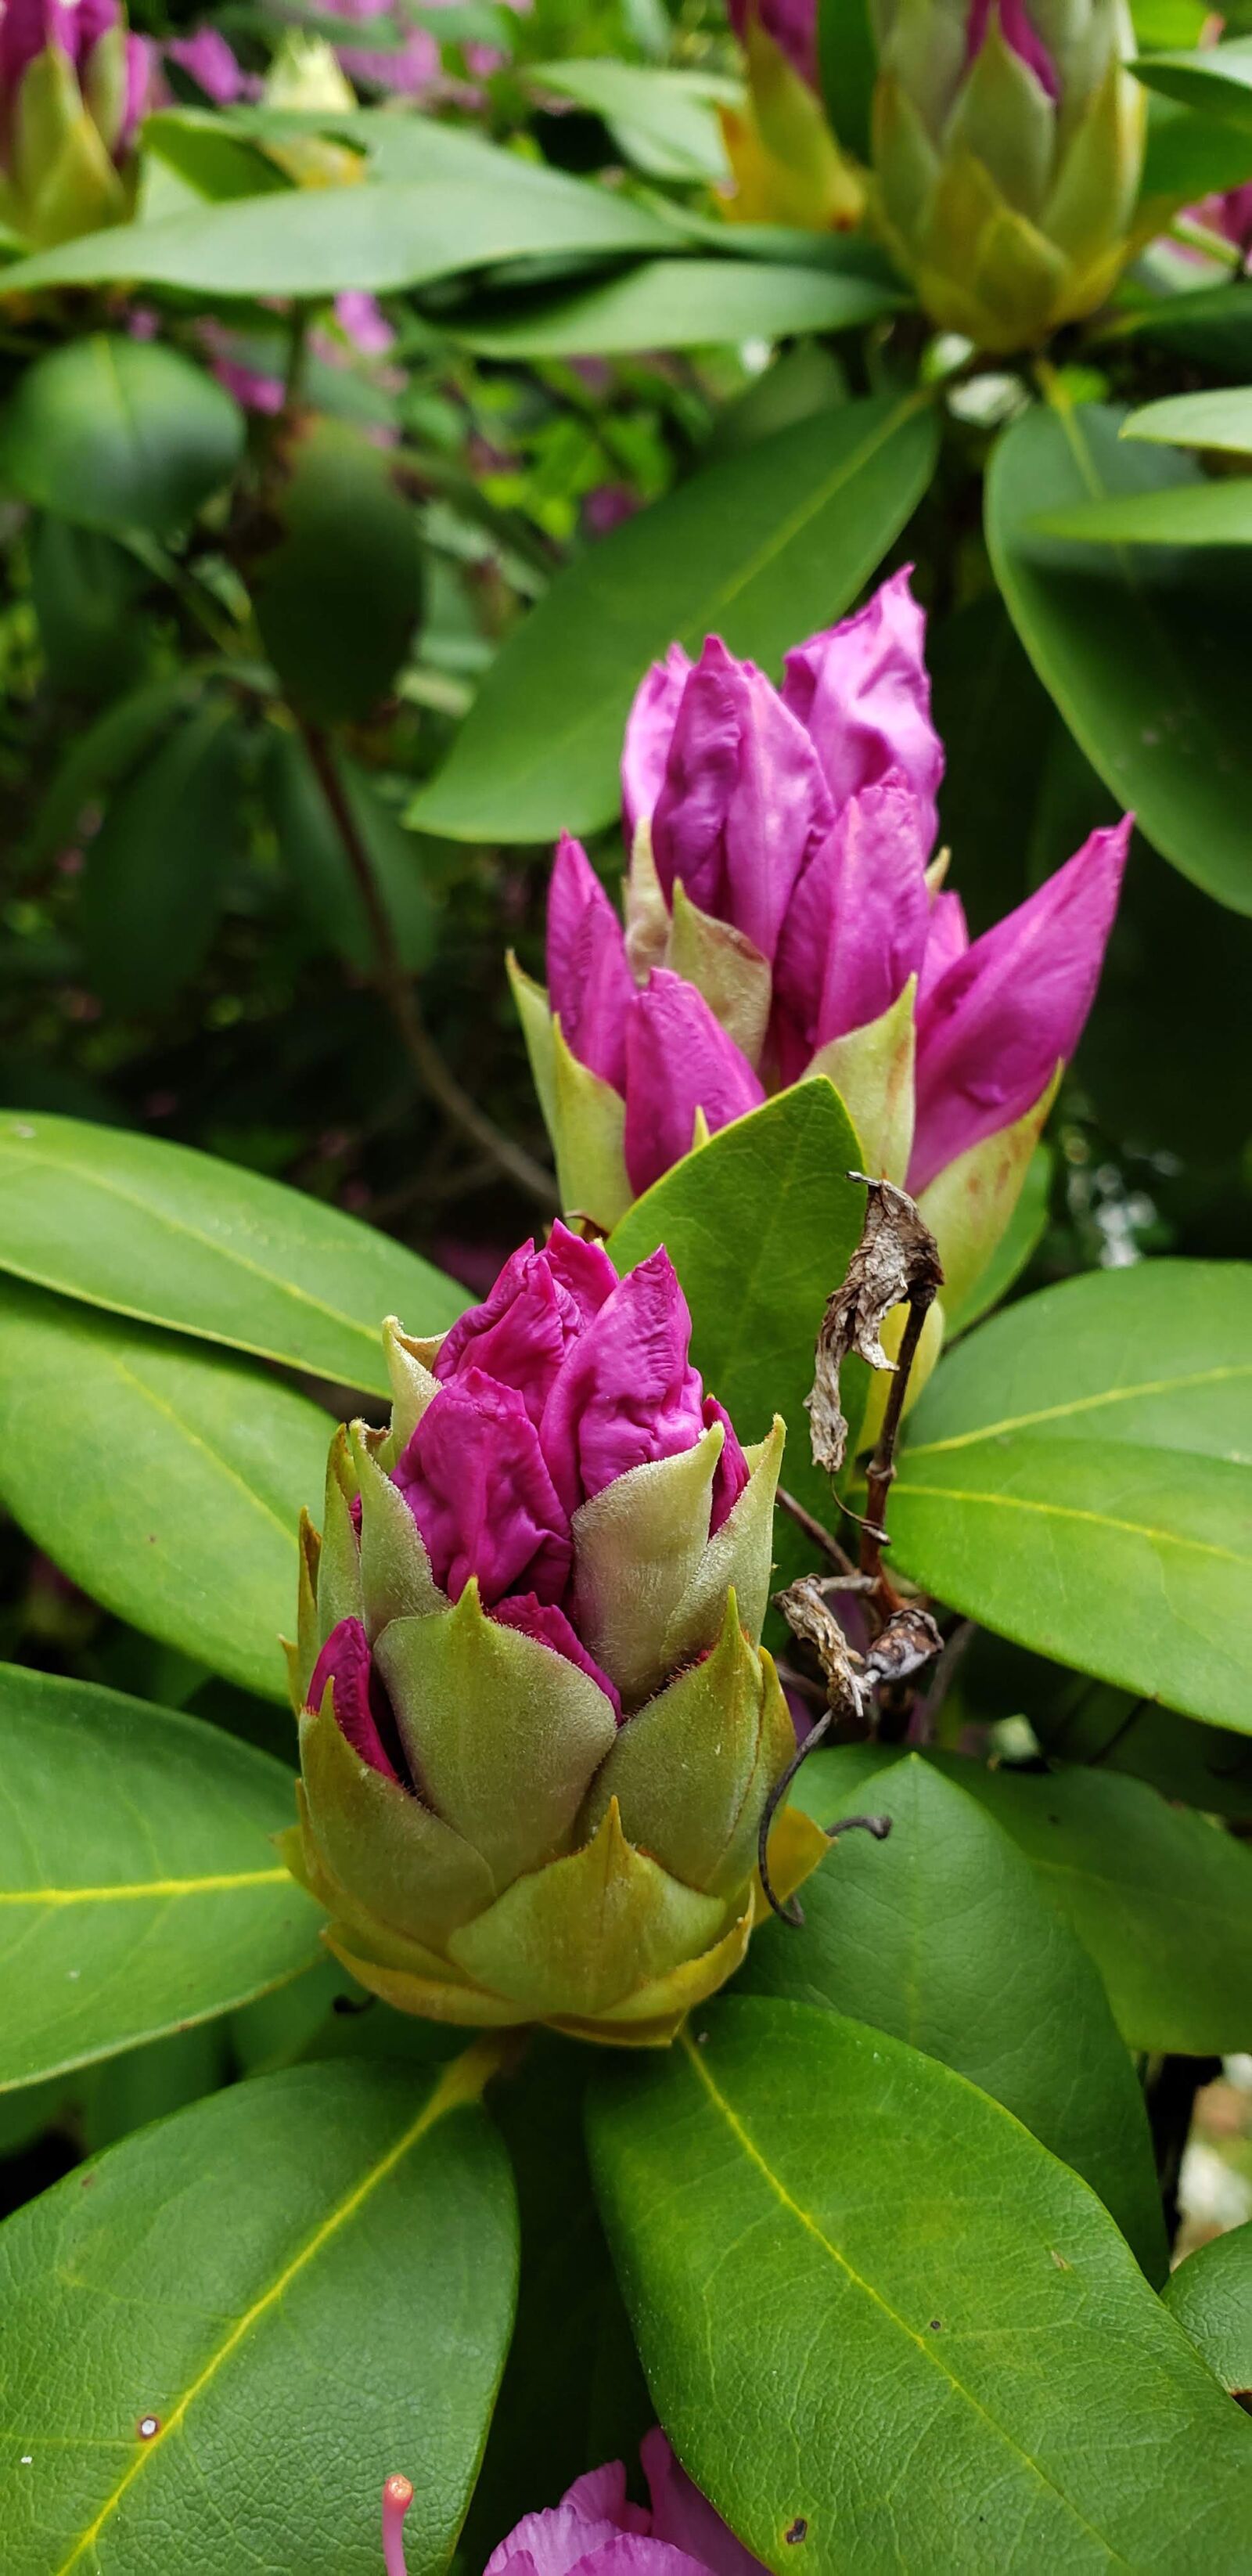 Samsung Galaxy S9 sample photo. Rhododendron buds, magenta flowers photography